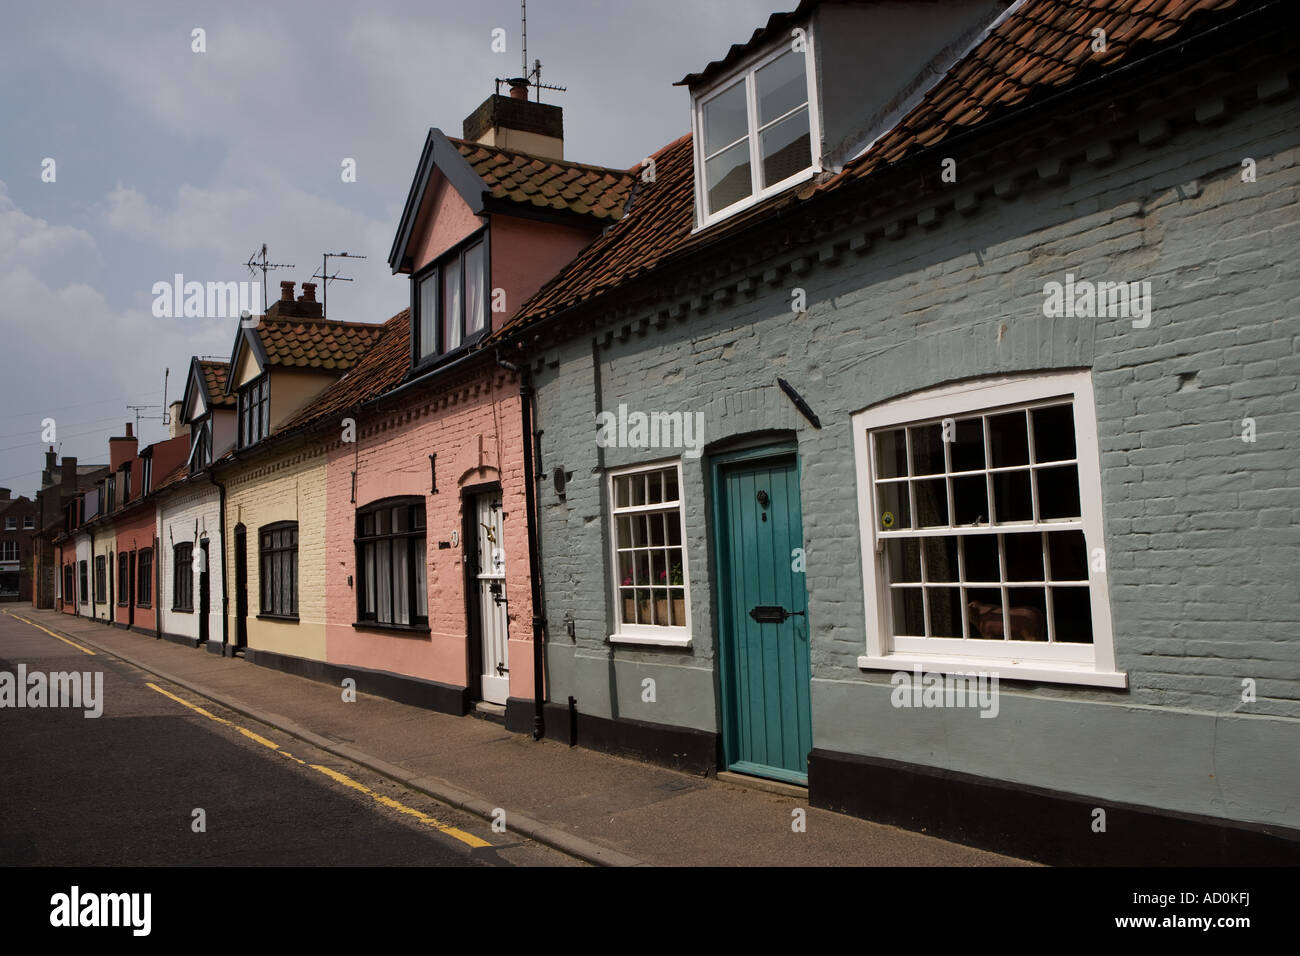 Terraced Cottages, Southwold, Suffolk, England, UK Stock Photo